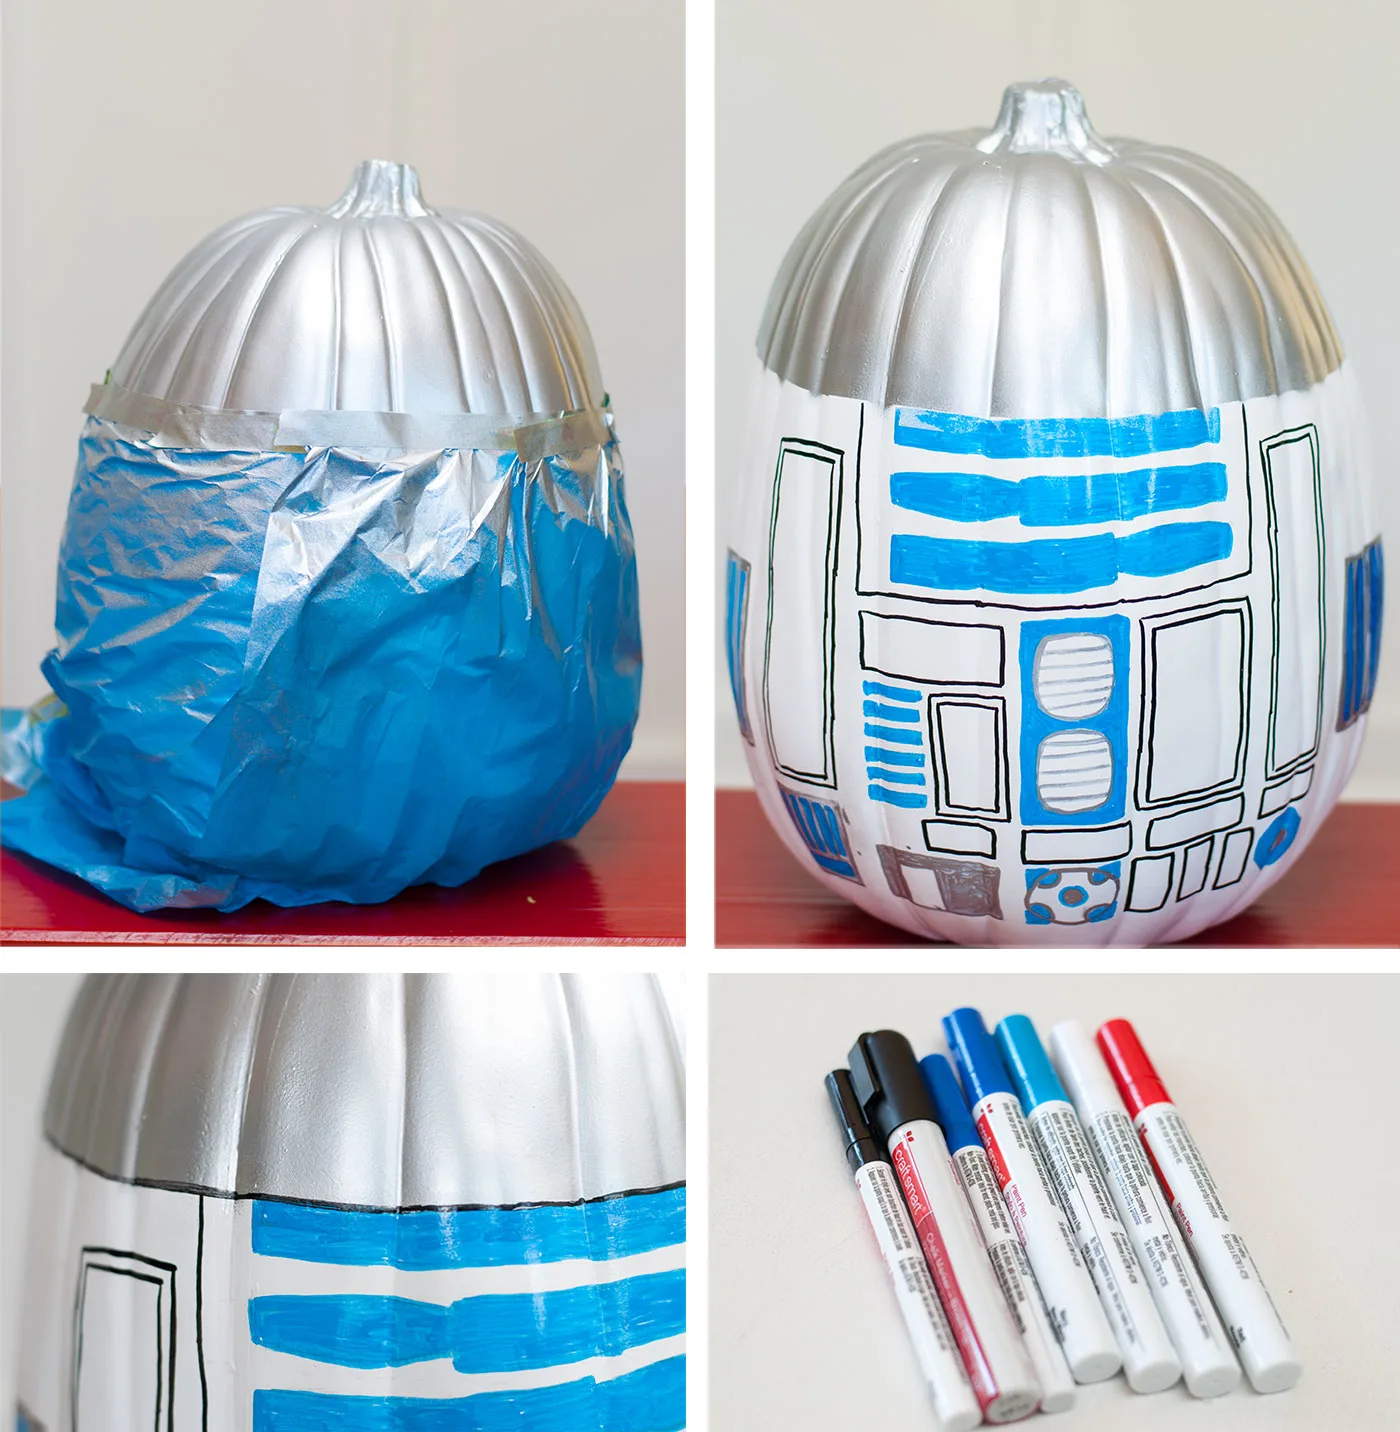 Adding details to the R2-D2 pumpkin with paint pens